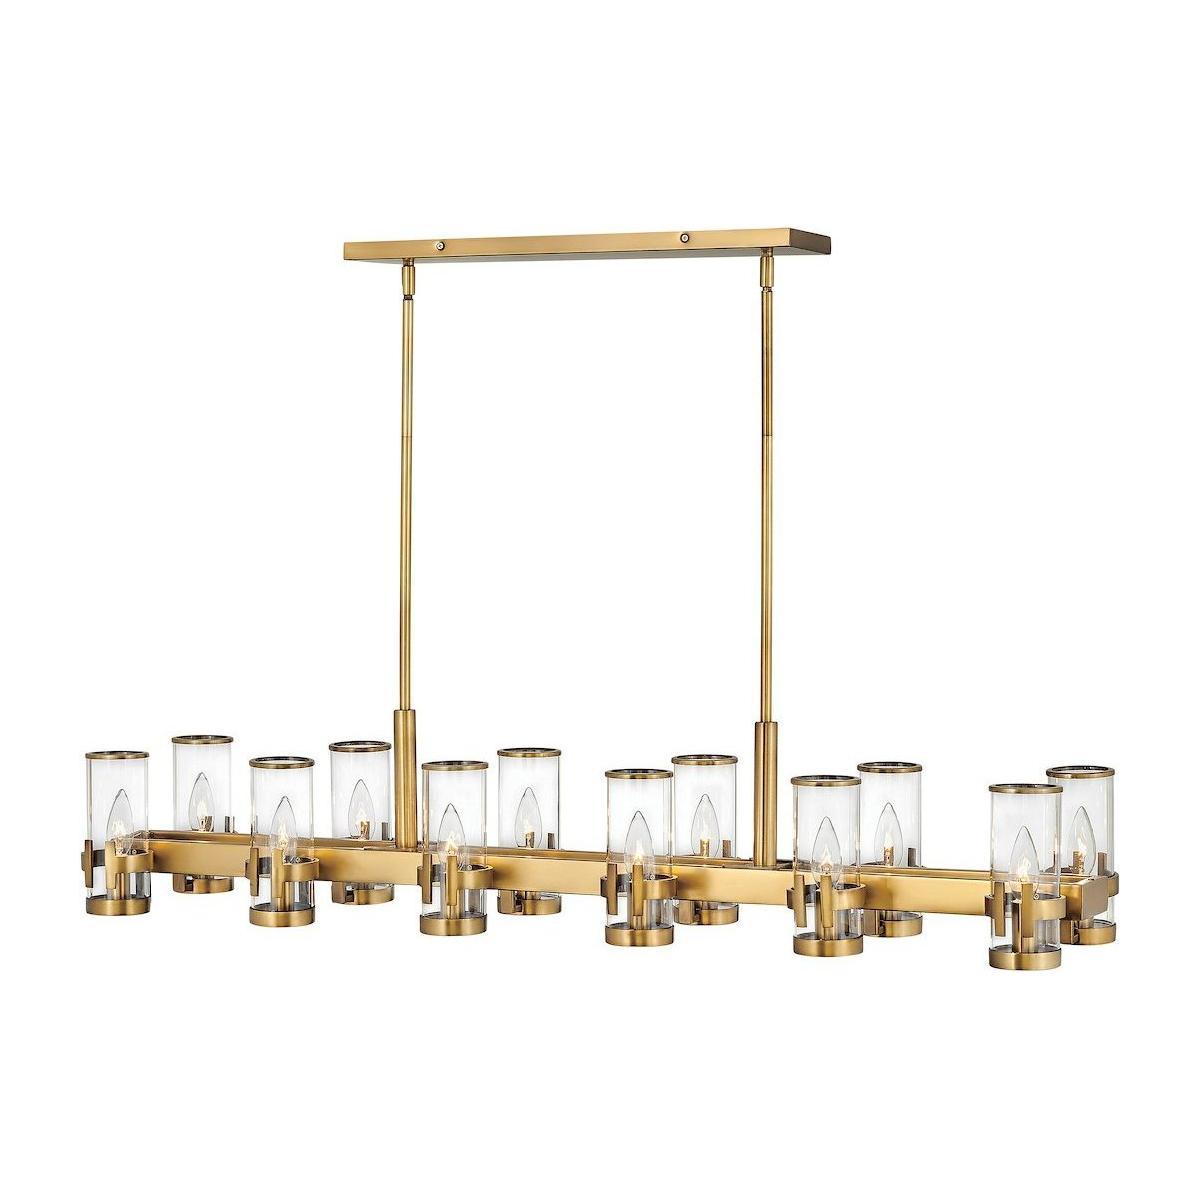 Hinkley - Reeve Linear Suspension - Lights Canada